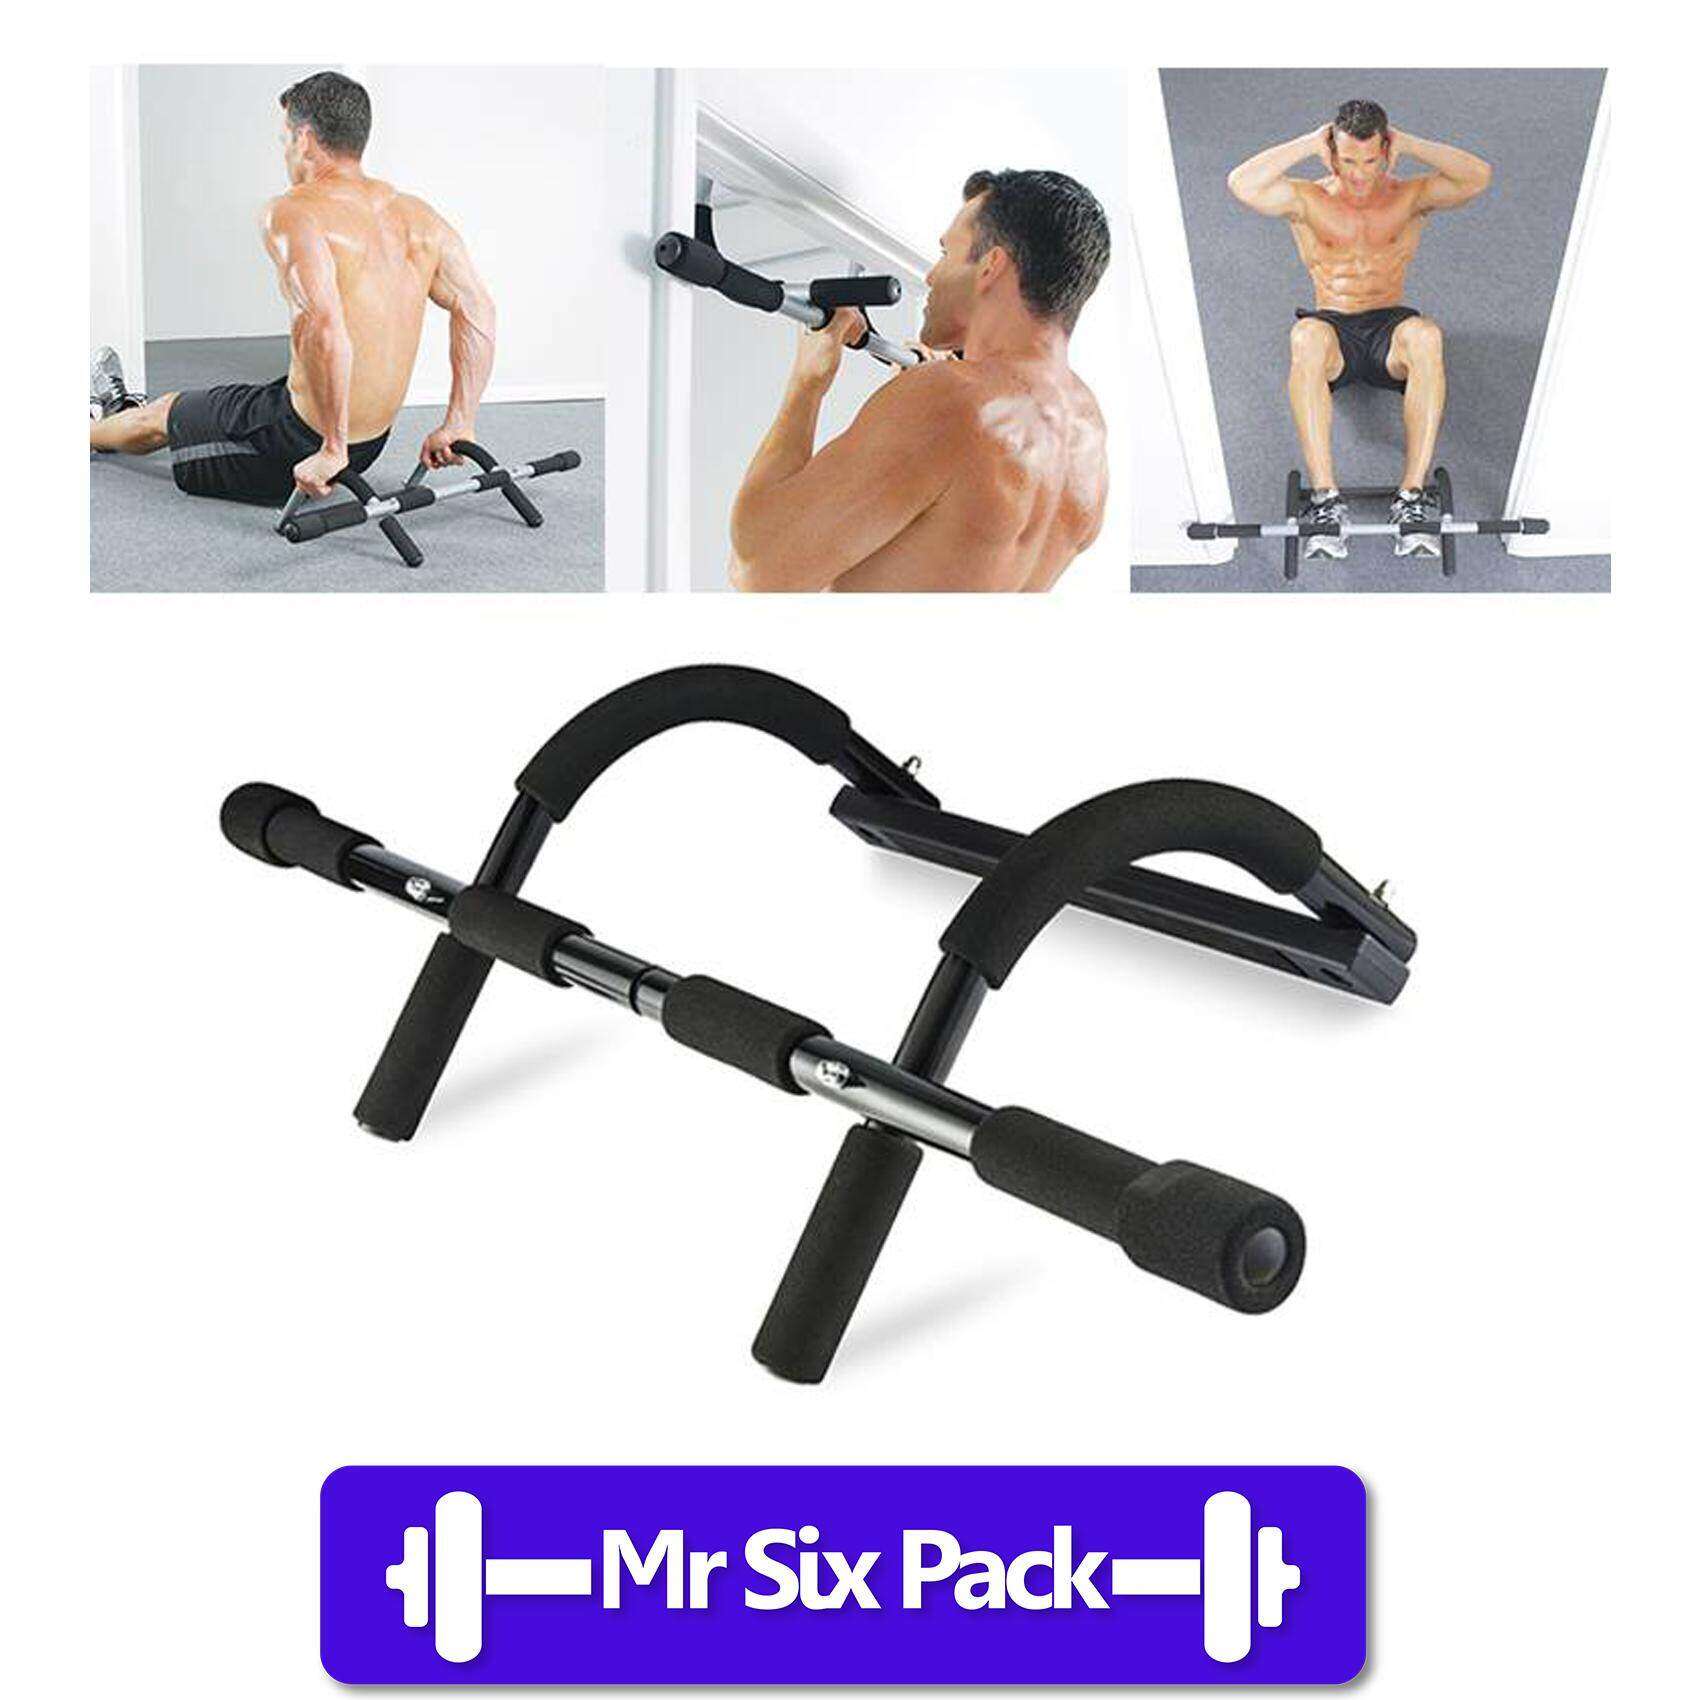 IBF Iron Body Fitness Door Gym – Pull-Up/Chin-Up Bar with Ab Sling